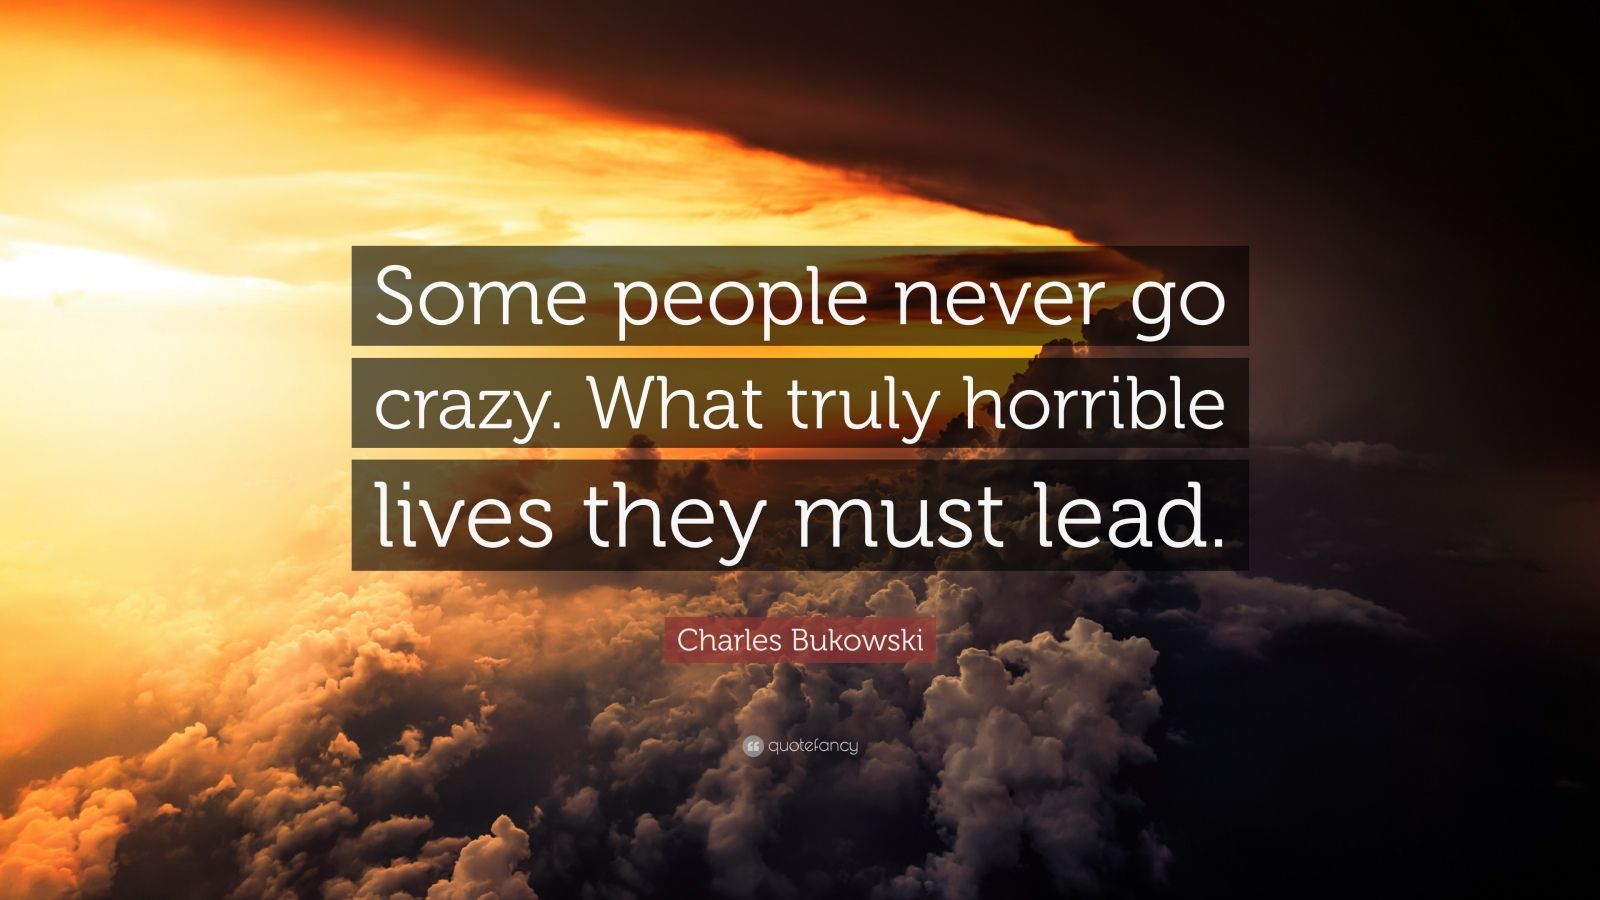 1701991 Charles Bukowski Quote Some people never go crazy What truly